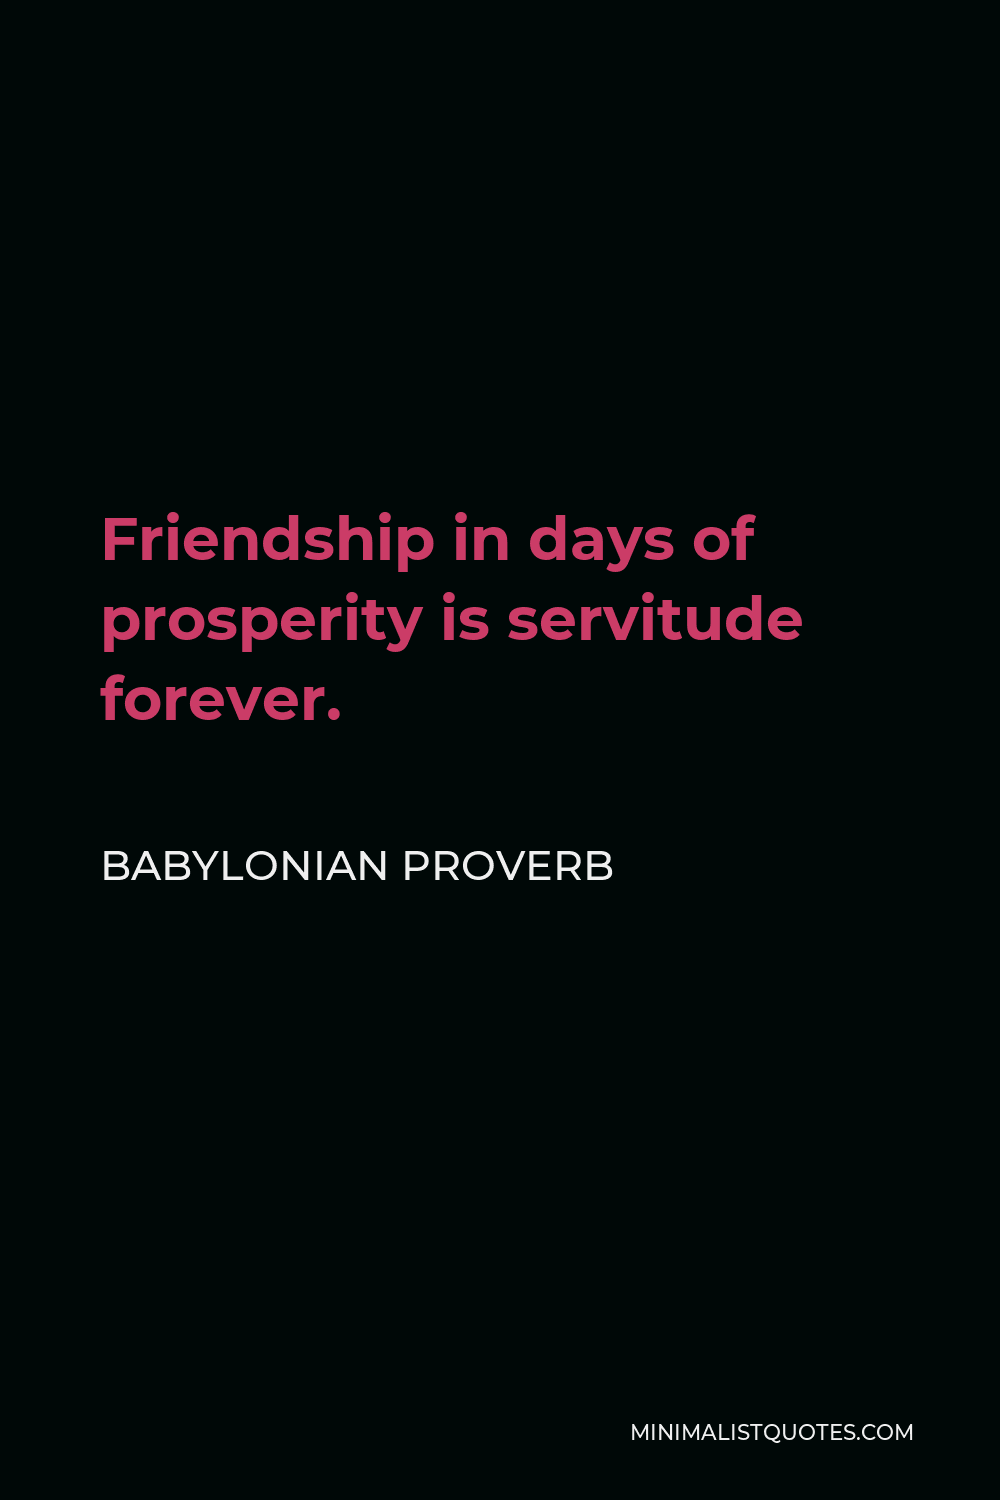 Babylonian Proverb Quote - Friendship in days of prosperity is servitude forever.